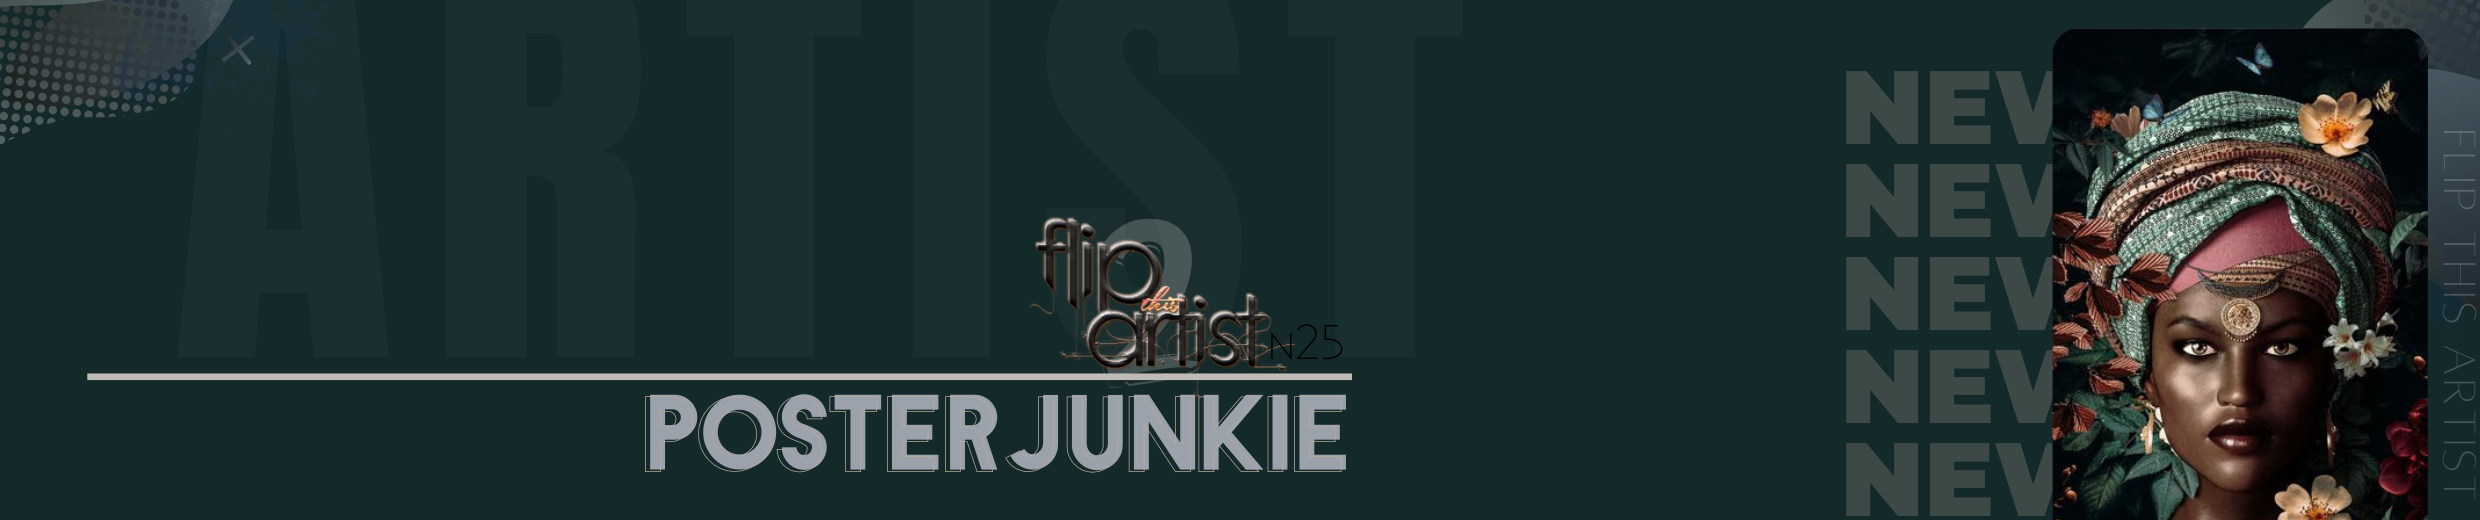 2_1665198863504_Copy of Copy of FLIP THIS ARTist banner for tk page.png